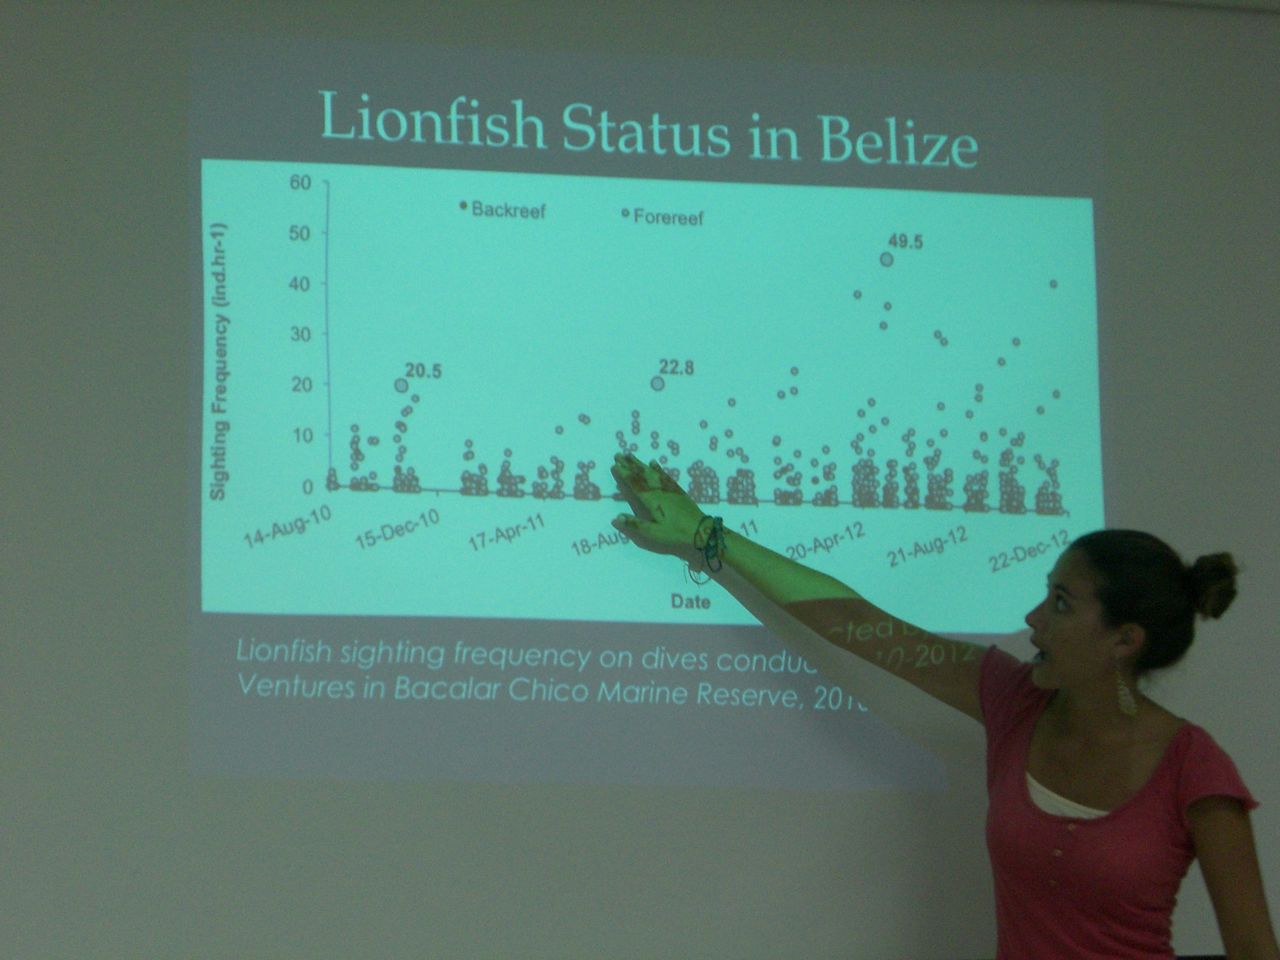 Jen points out the strong increase in lionfish sighting frequencies during dives in Bacalar Chico